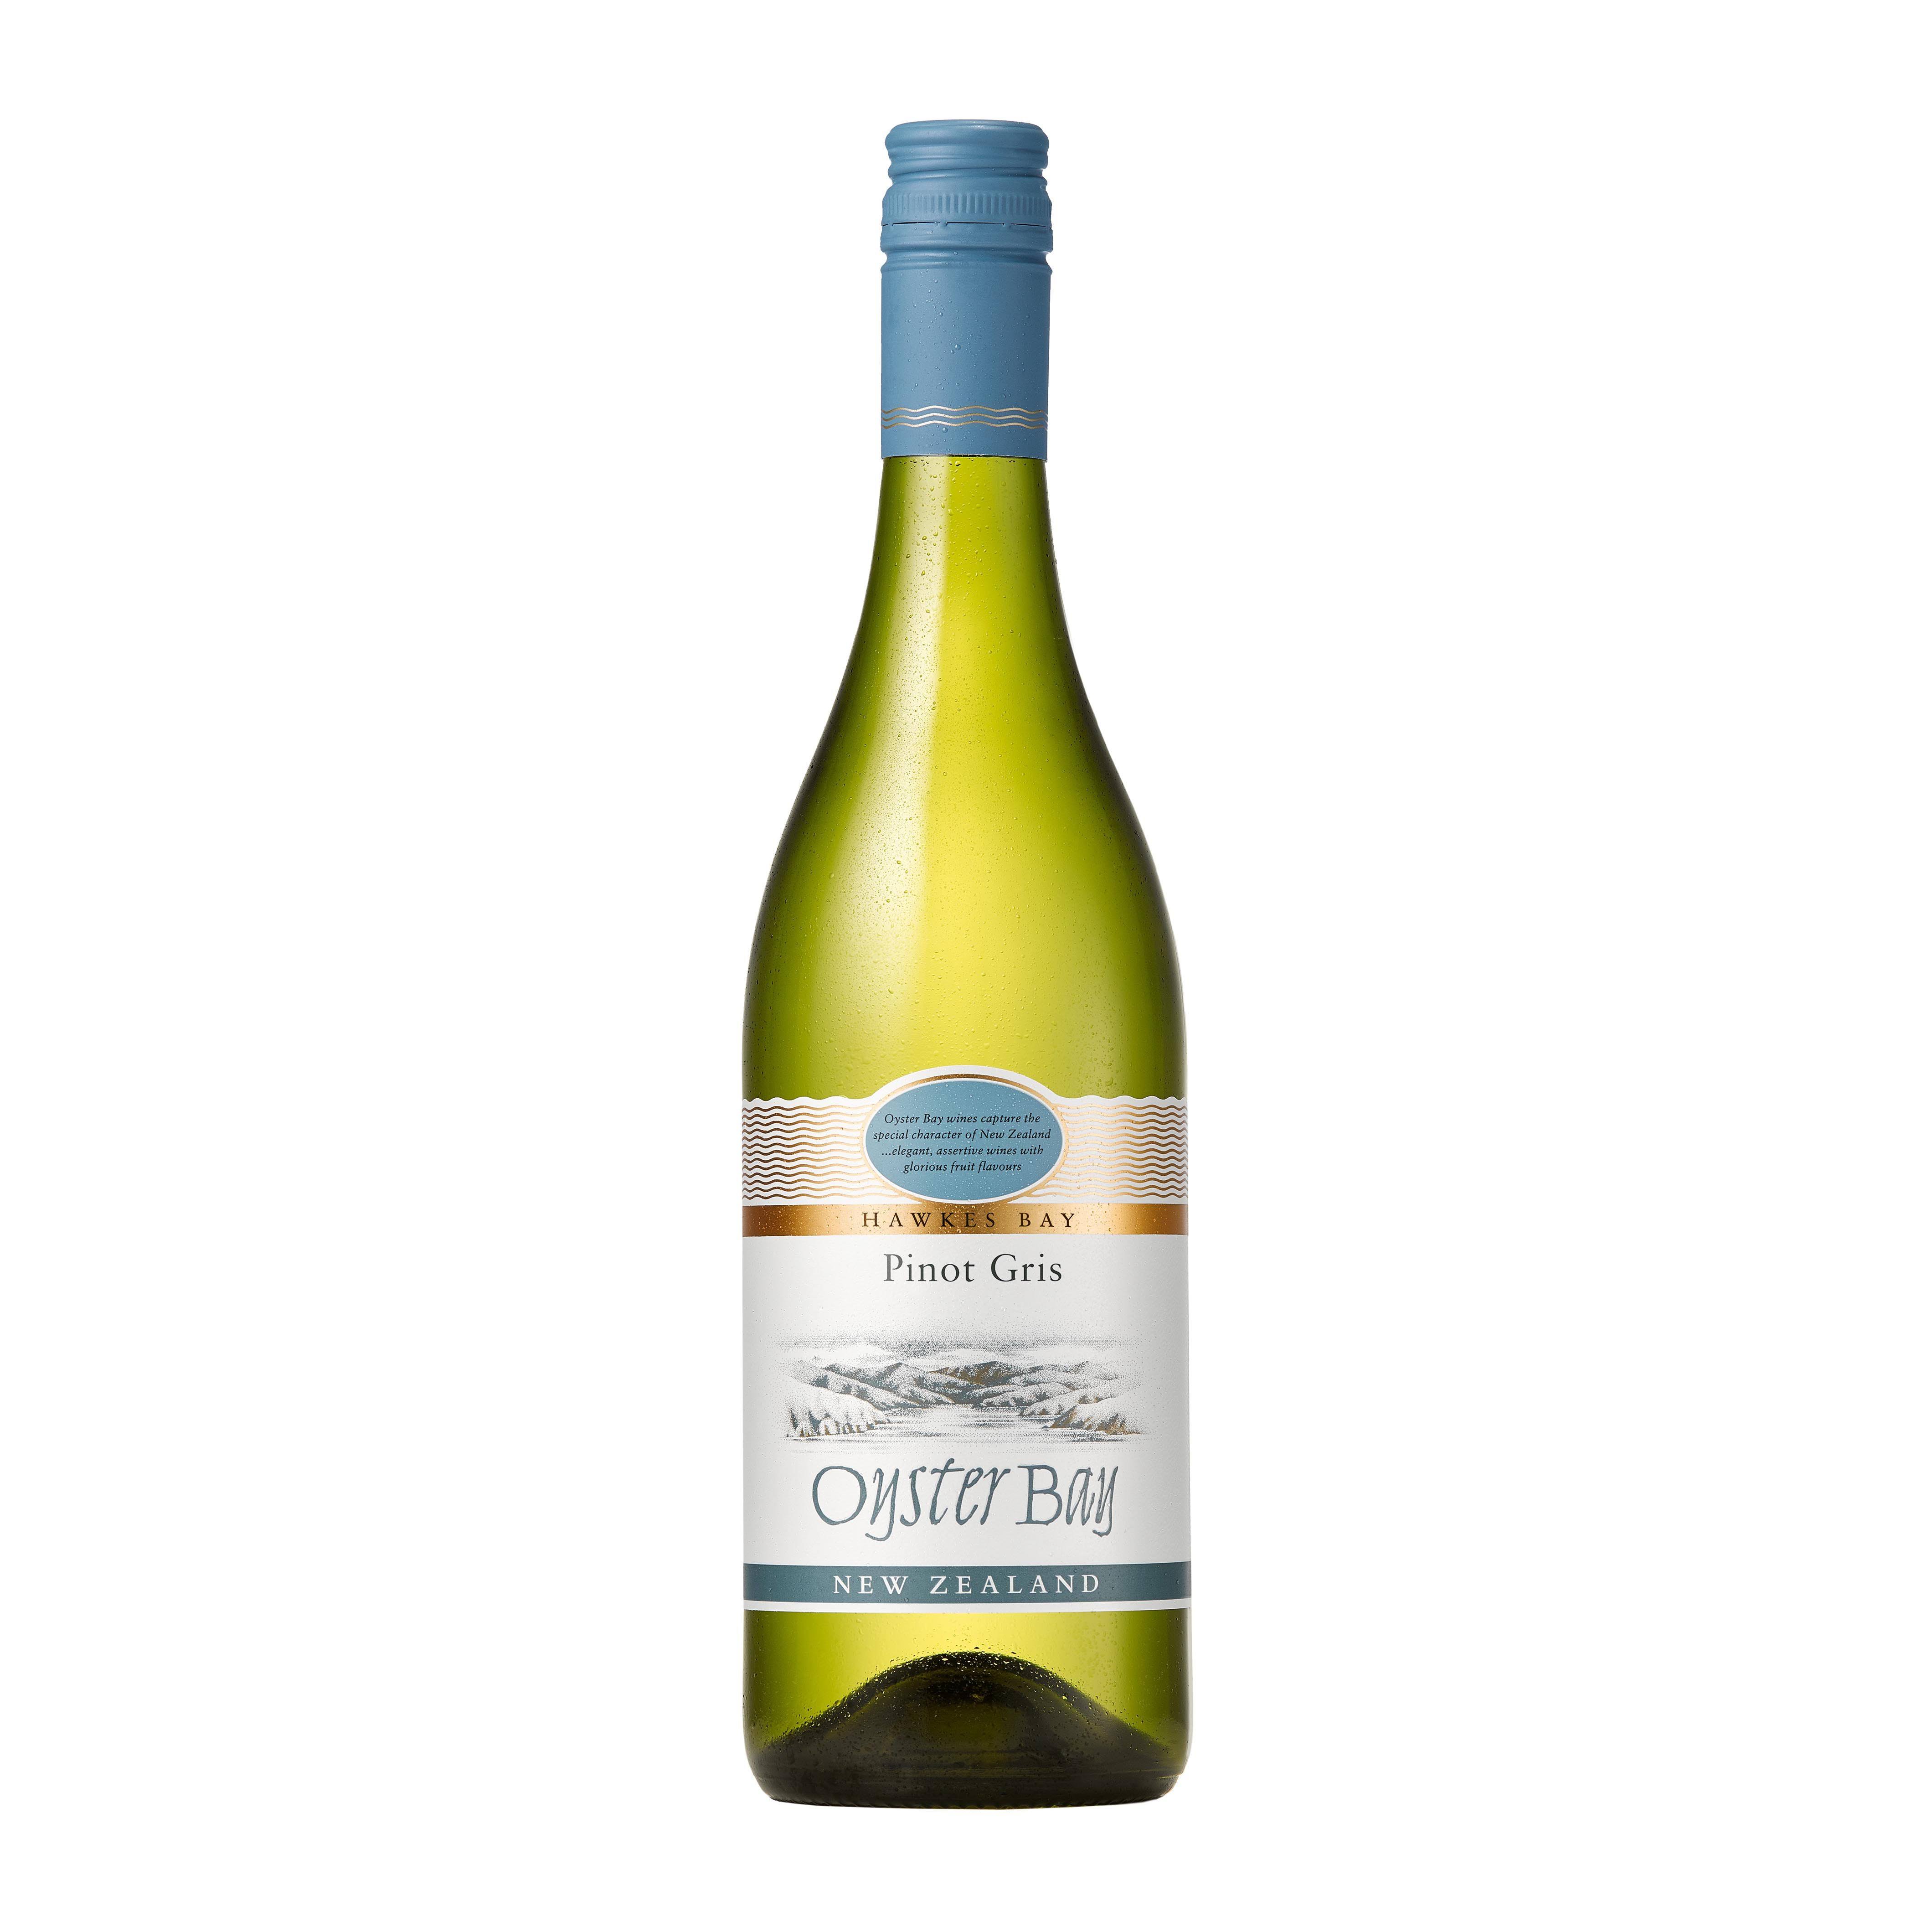 Oyster Bay Pinot Gris, Hawkes Bay, New Zealand - 750 ml